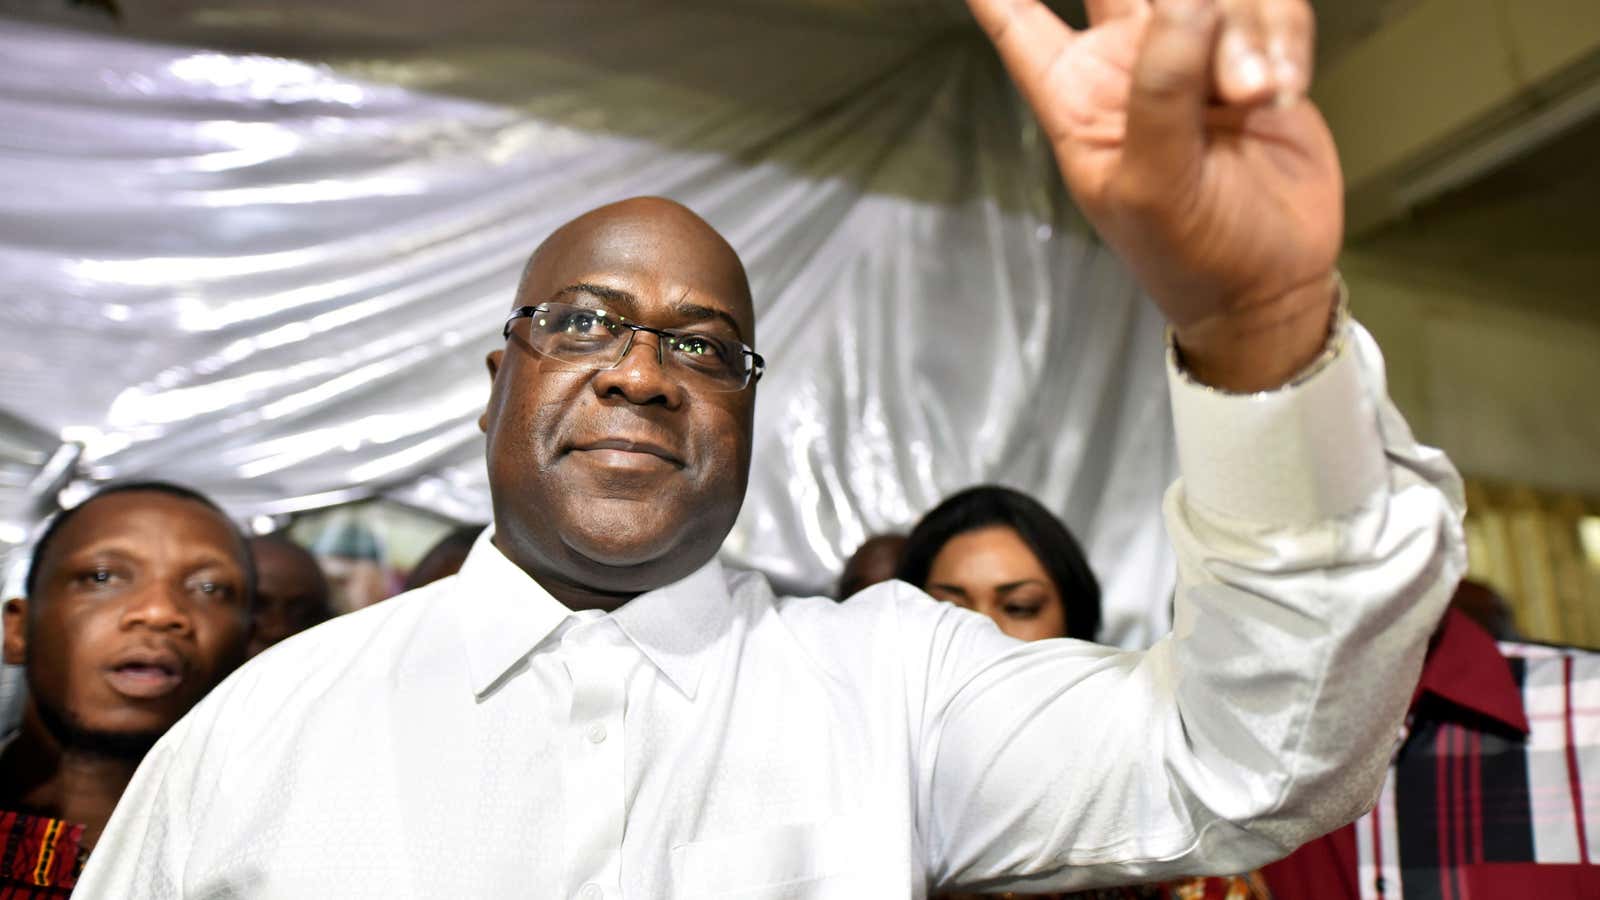 Felix Tshisekedi, leader of the Congolese main opposition party, the Union for Democracy and Social Progress